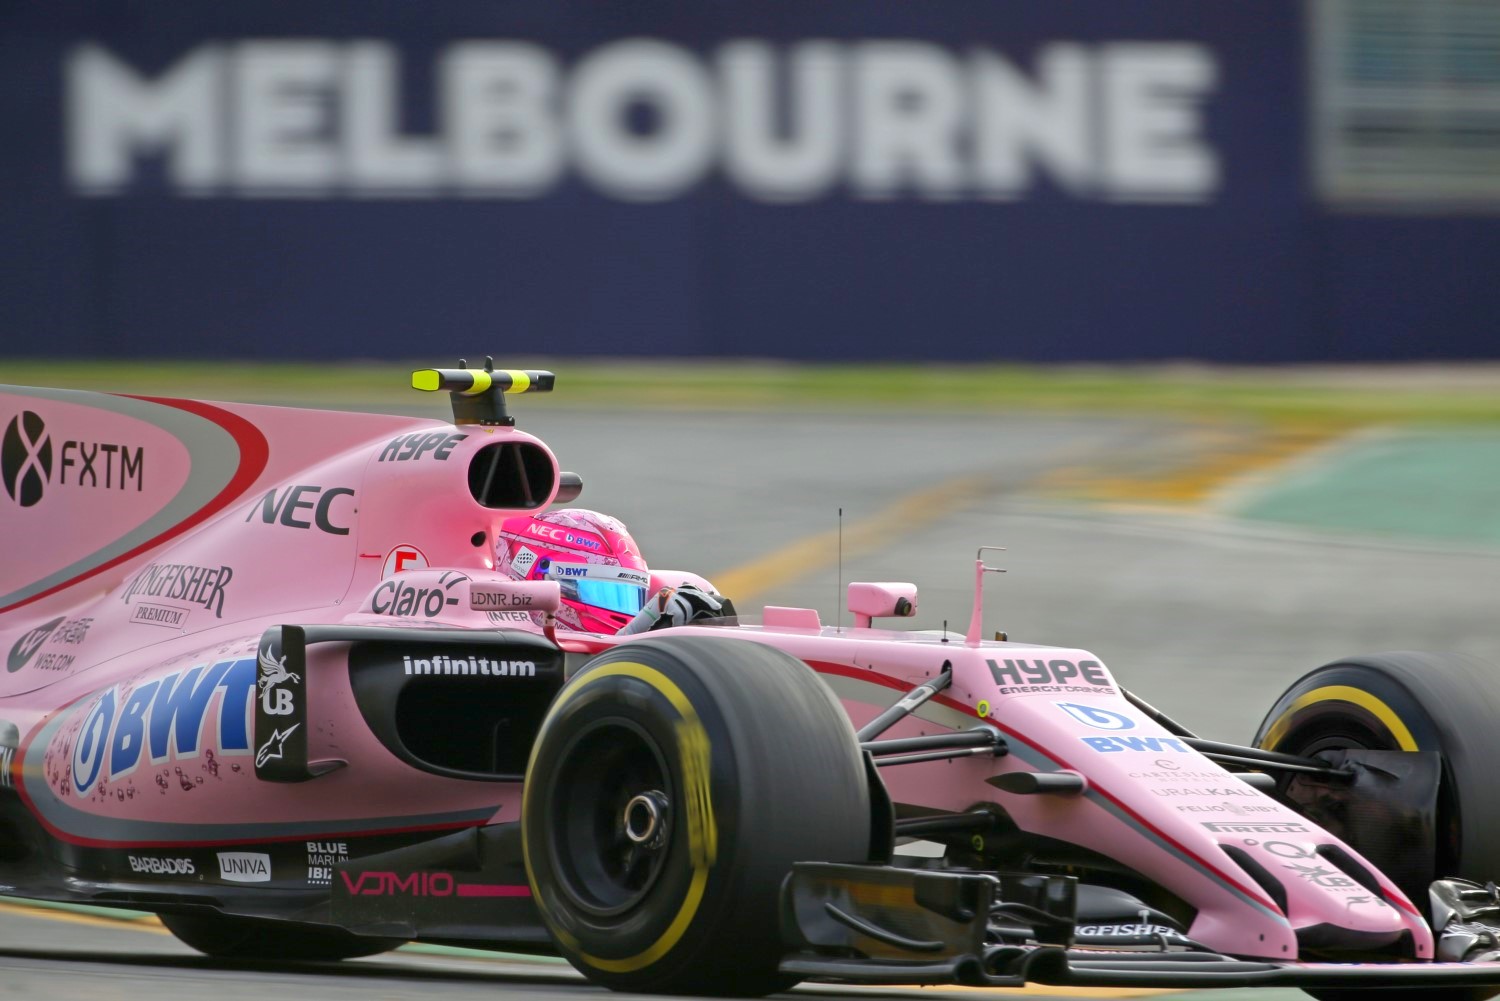 Will Force India be sold?